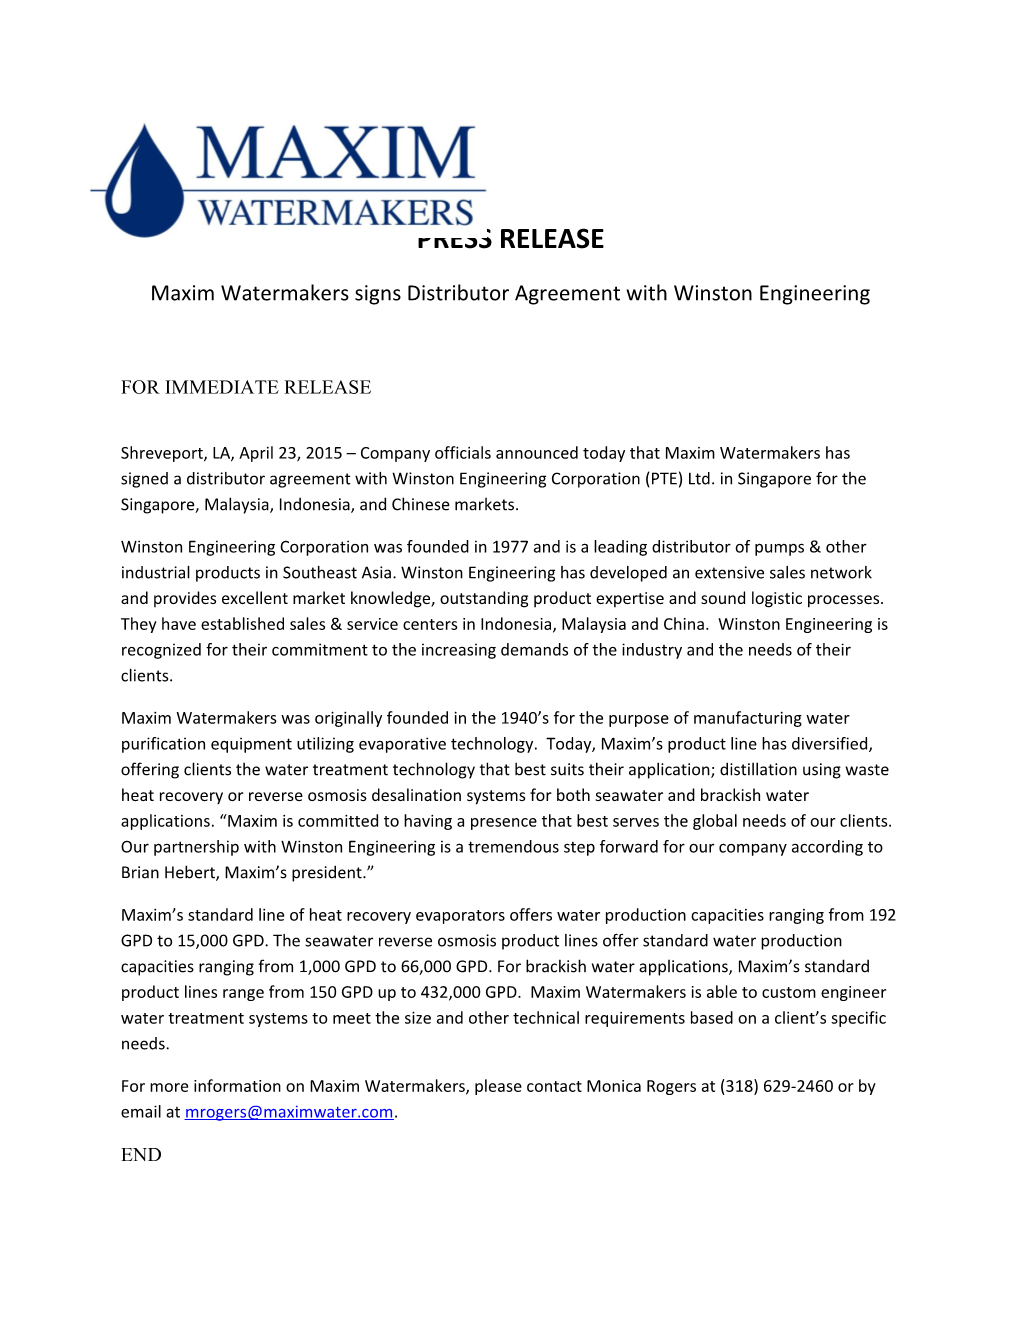 Maxim Watermakerssigns Distributor Agreement with Winston Engineering